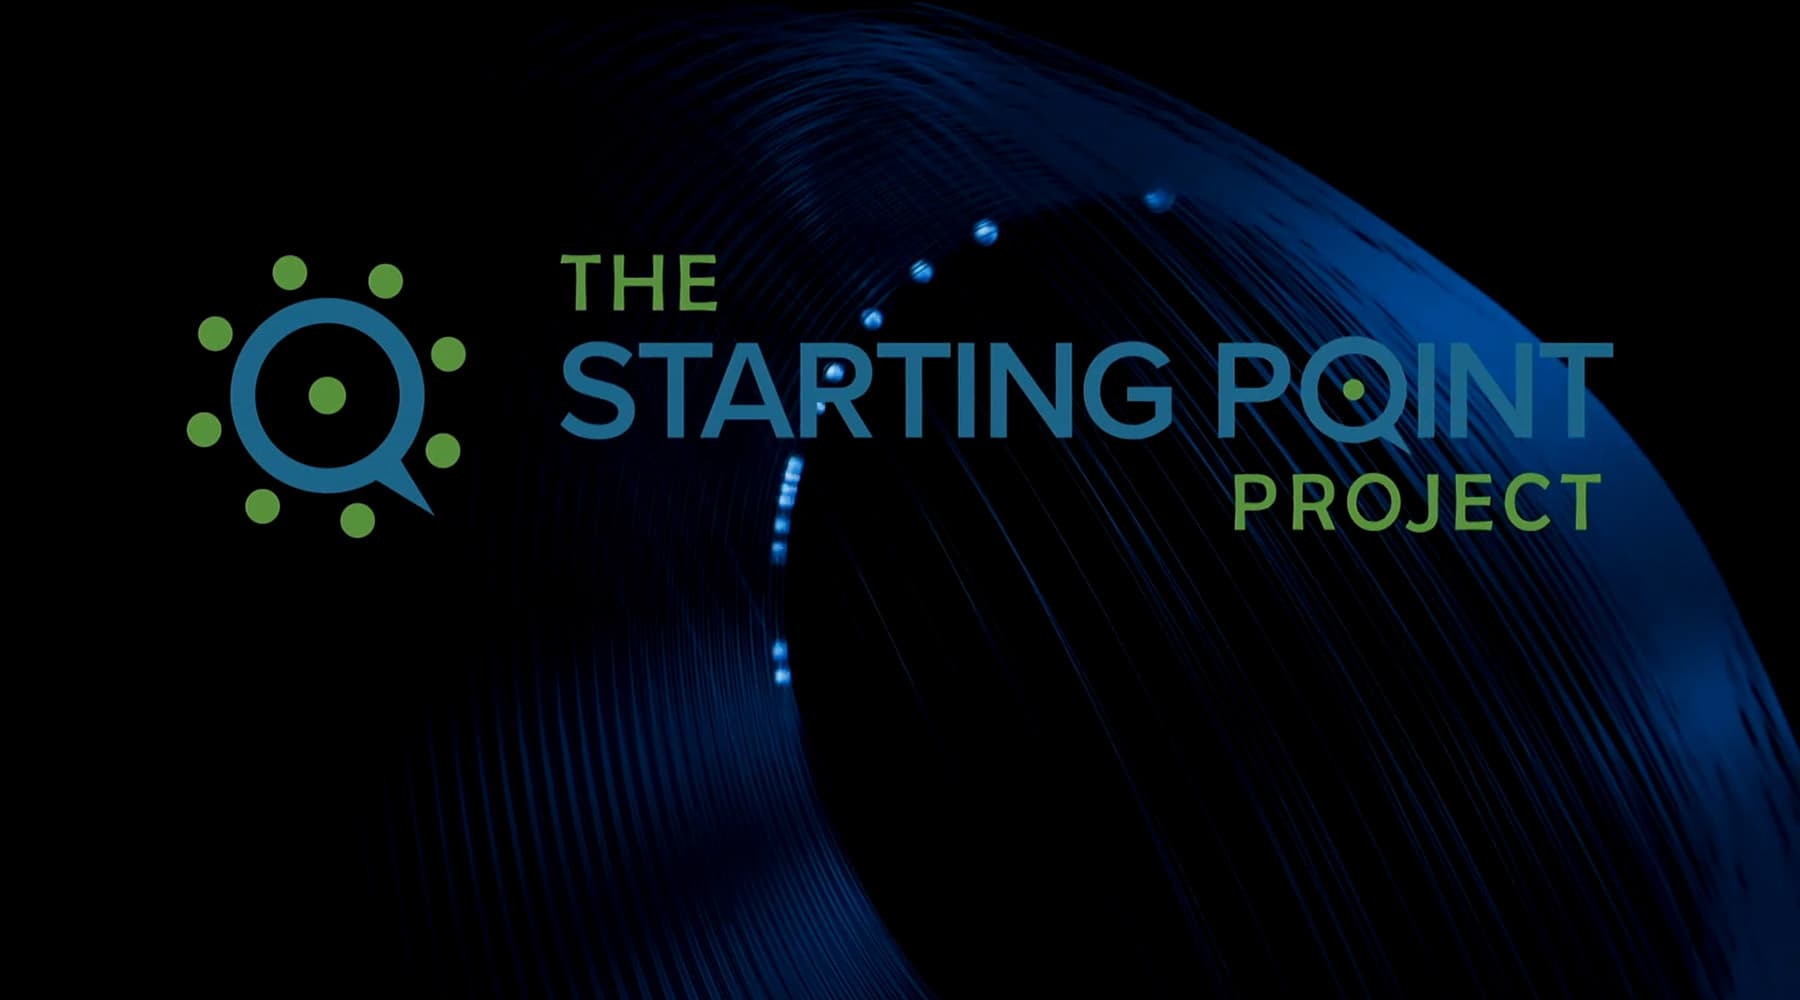 The Starting Point Project logo on black background